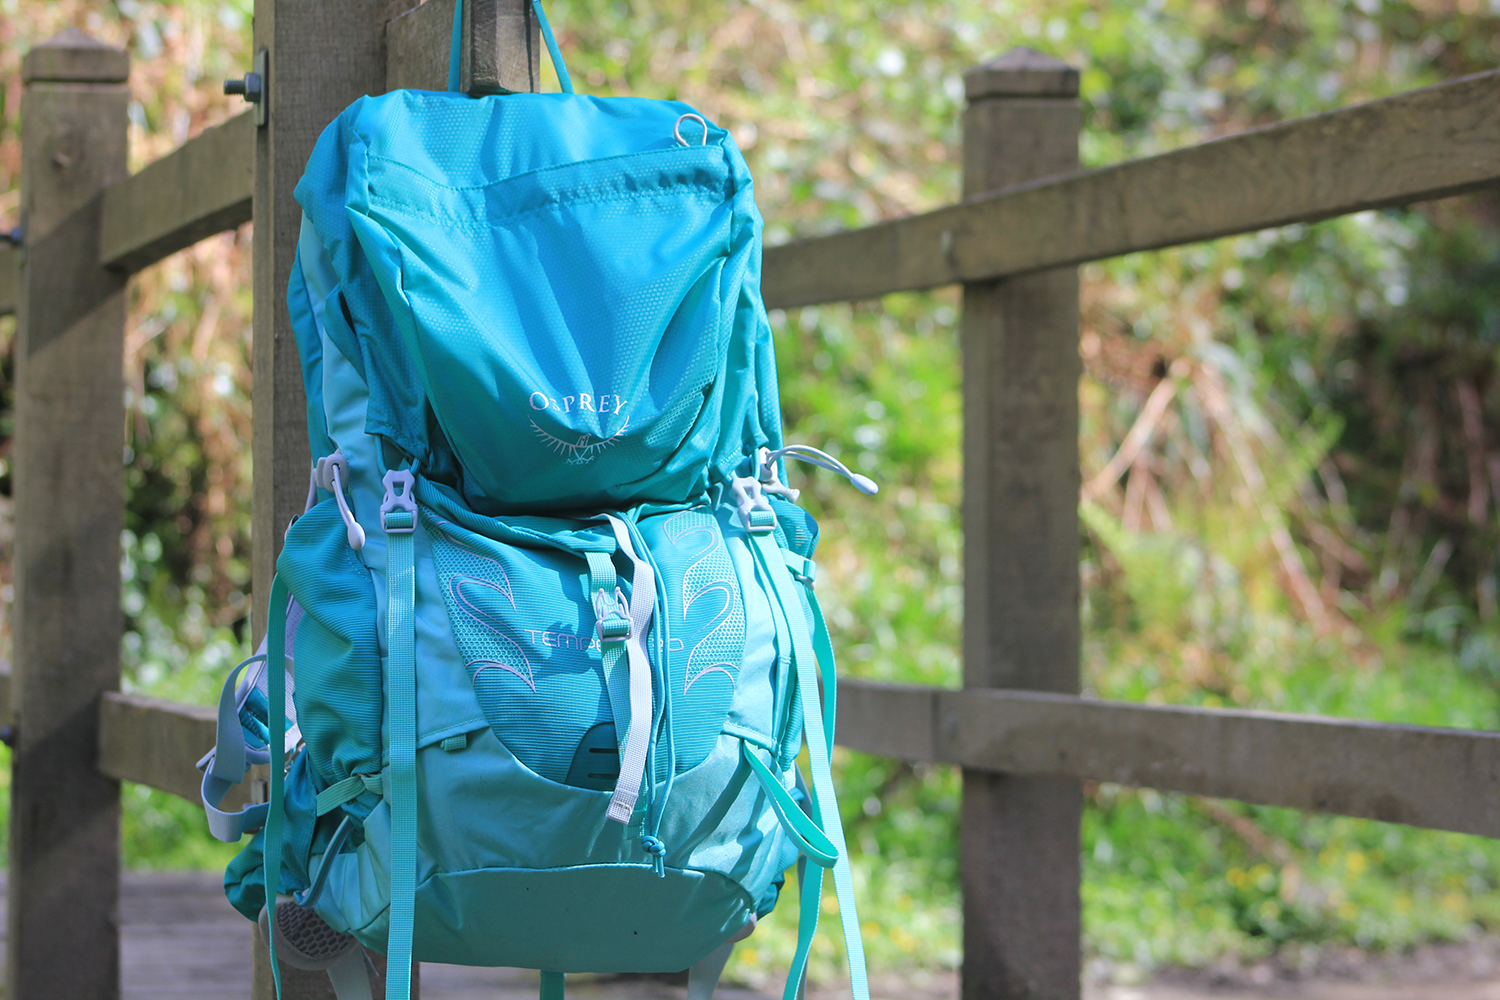 Reviewing The Osprey Womens Tempest 30ltr Hiking Backpack